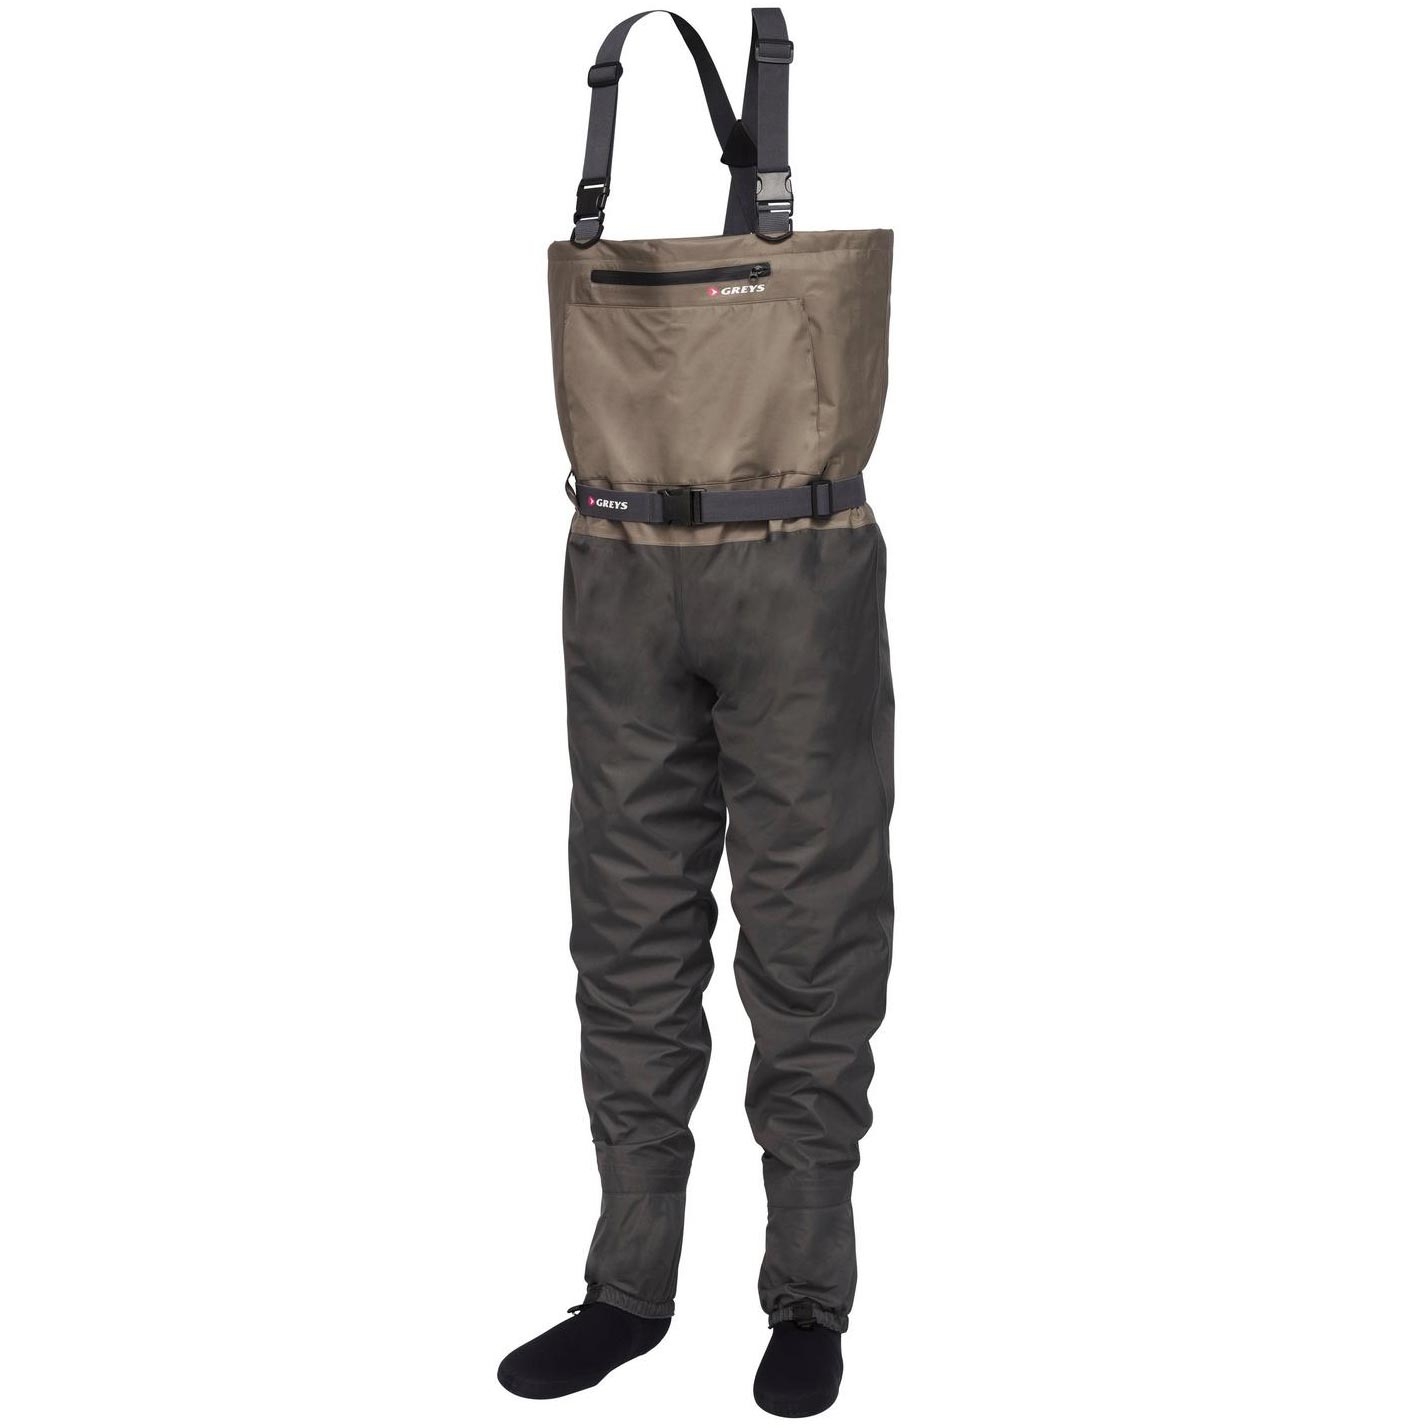 Chest Waders - Fishing Waders - Angling Active